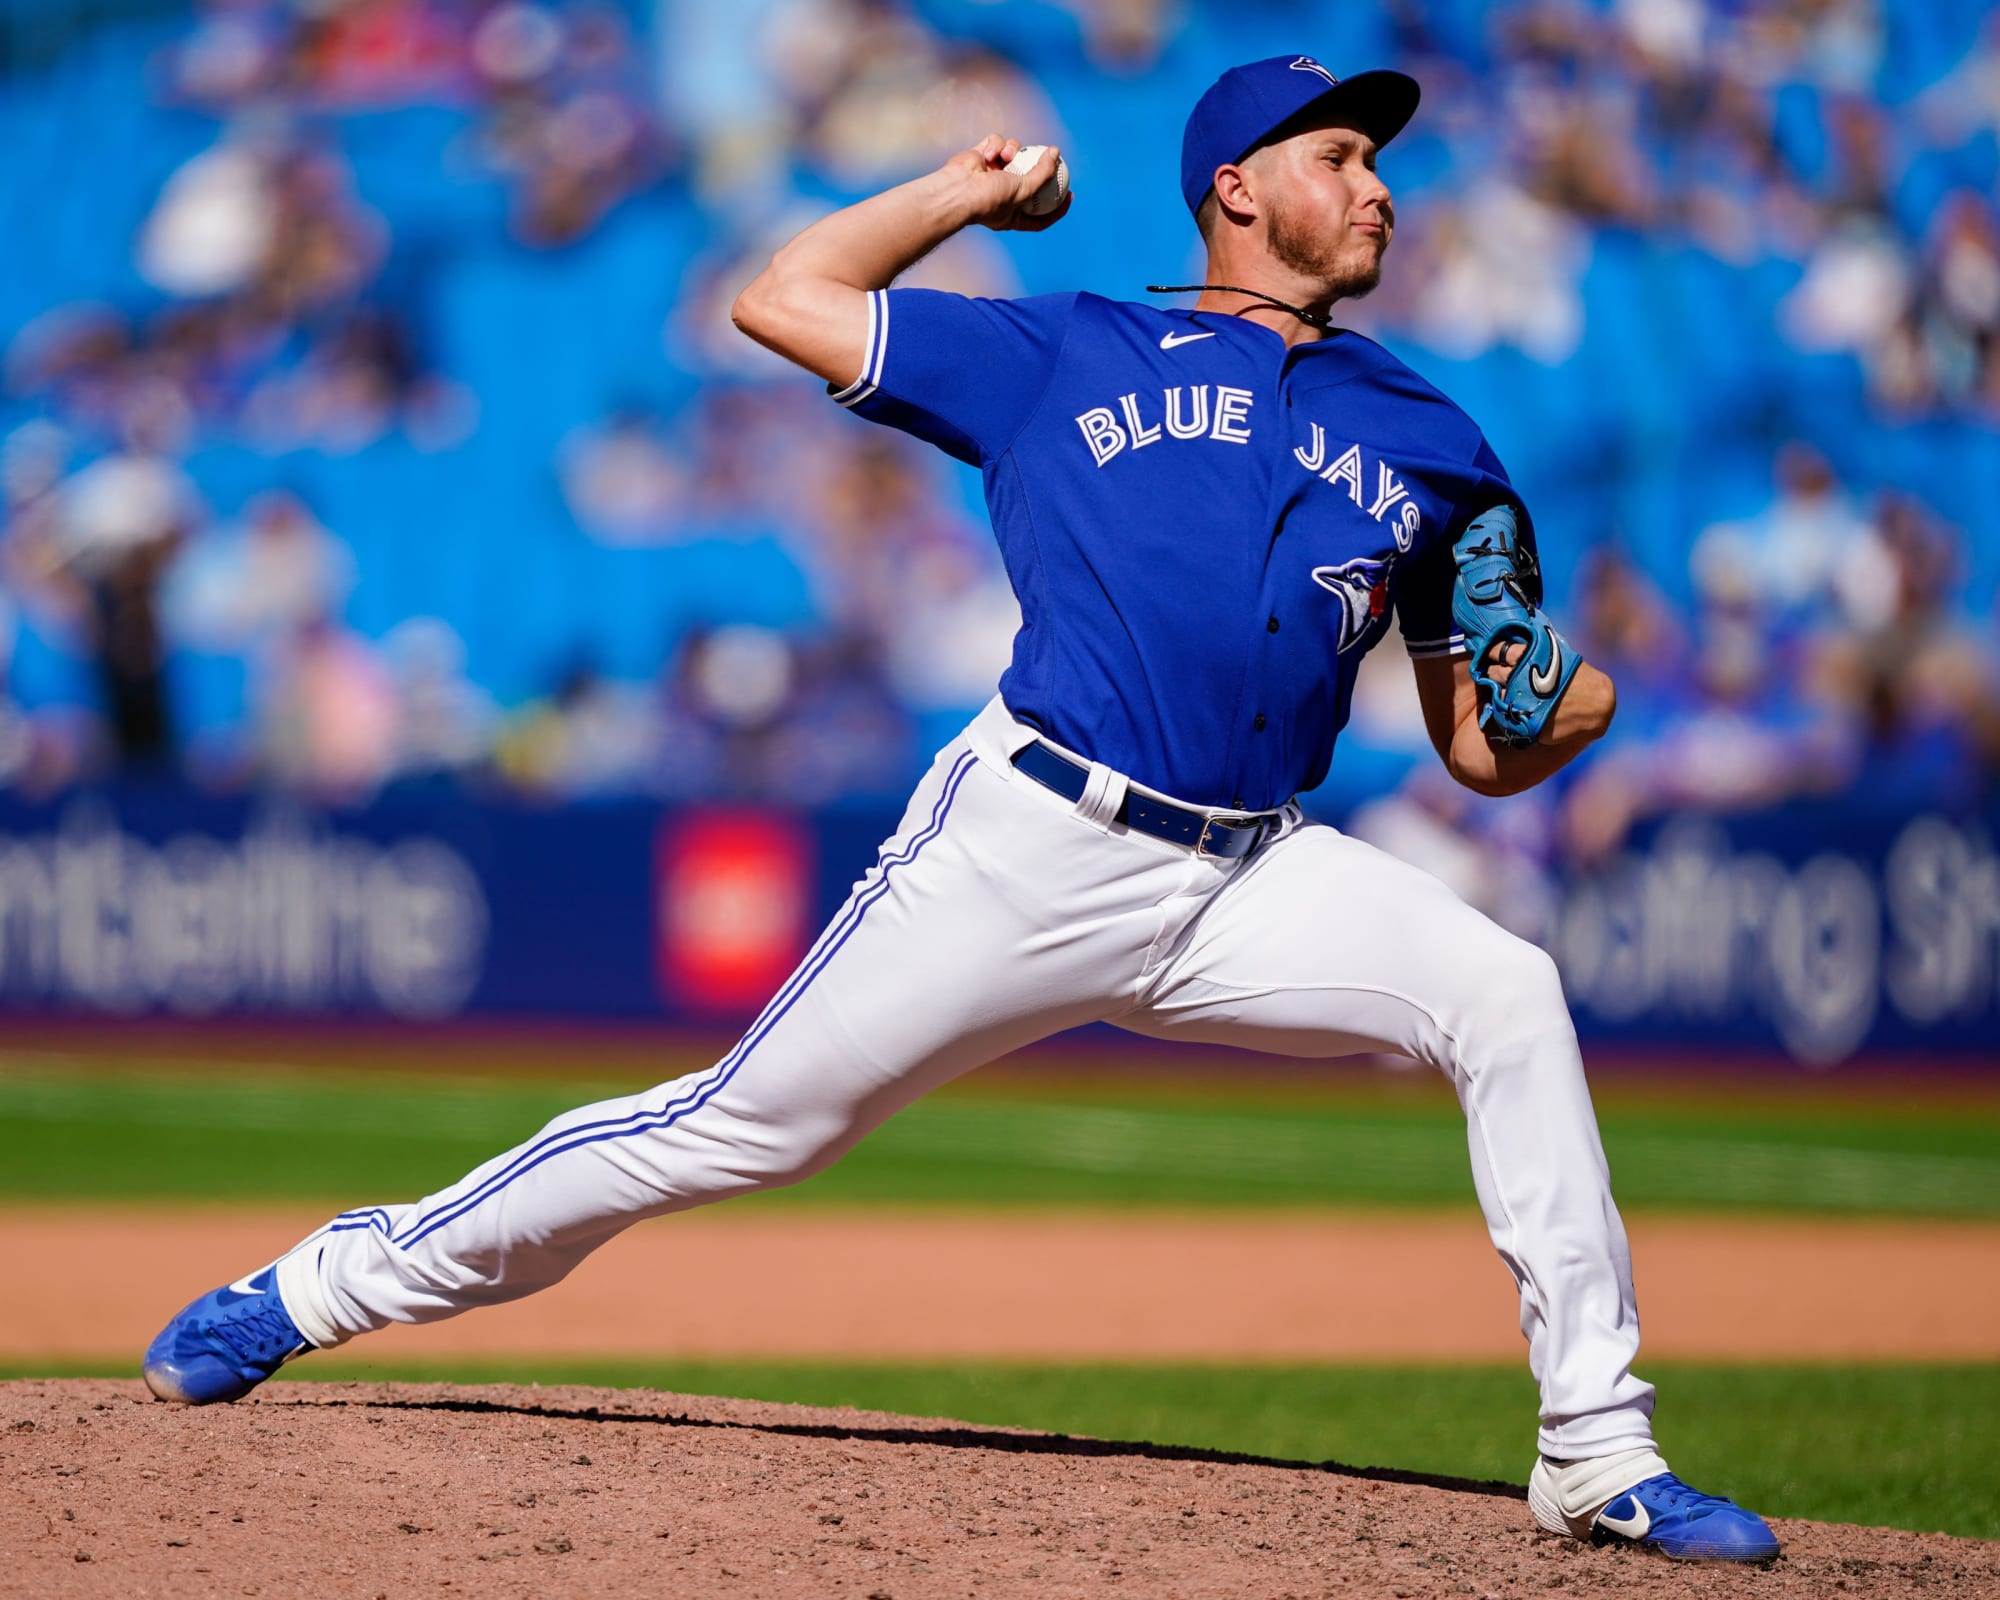 Blue Jays' Nate Pearson aggravates strained right groin - NBC Sports